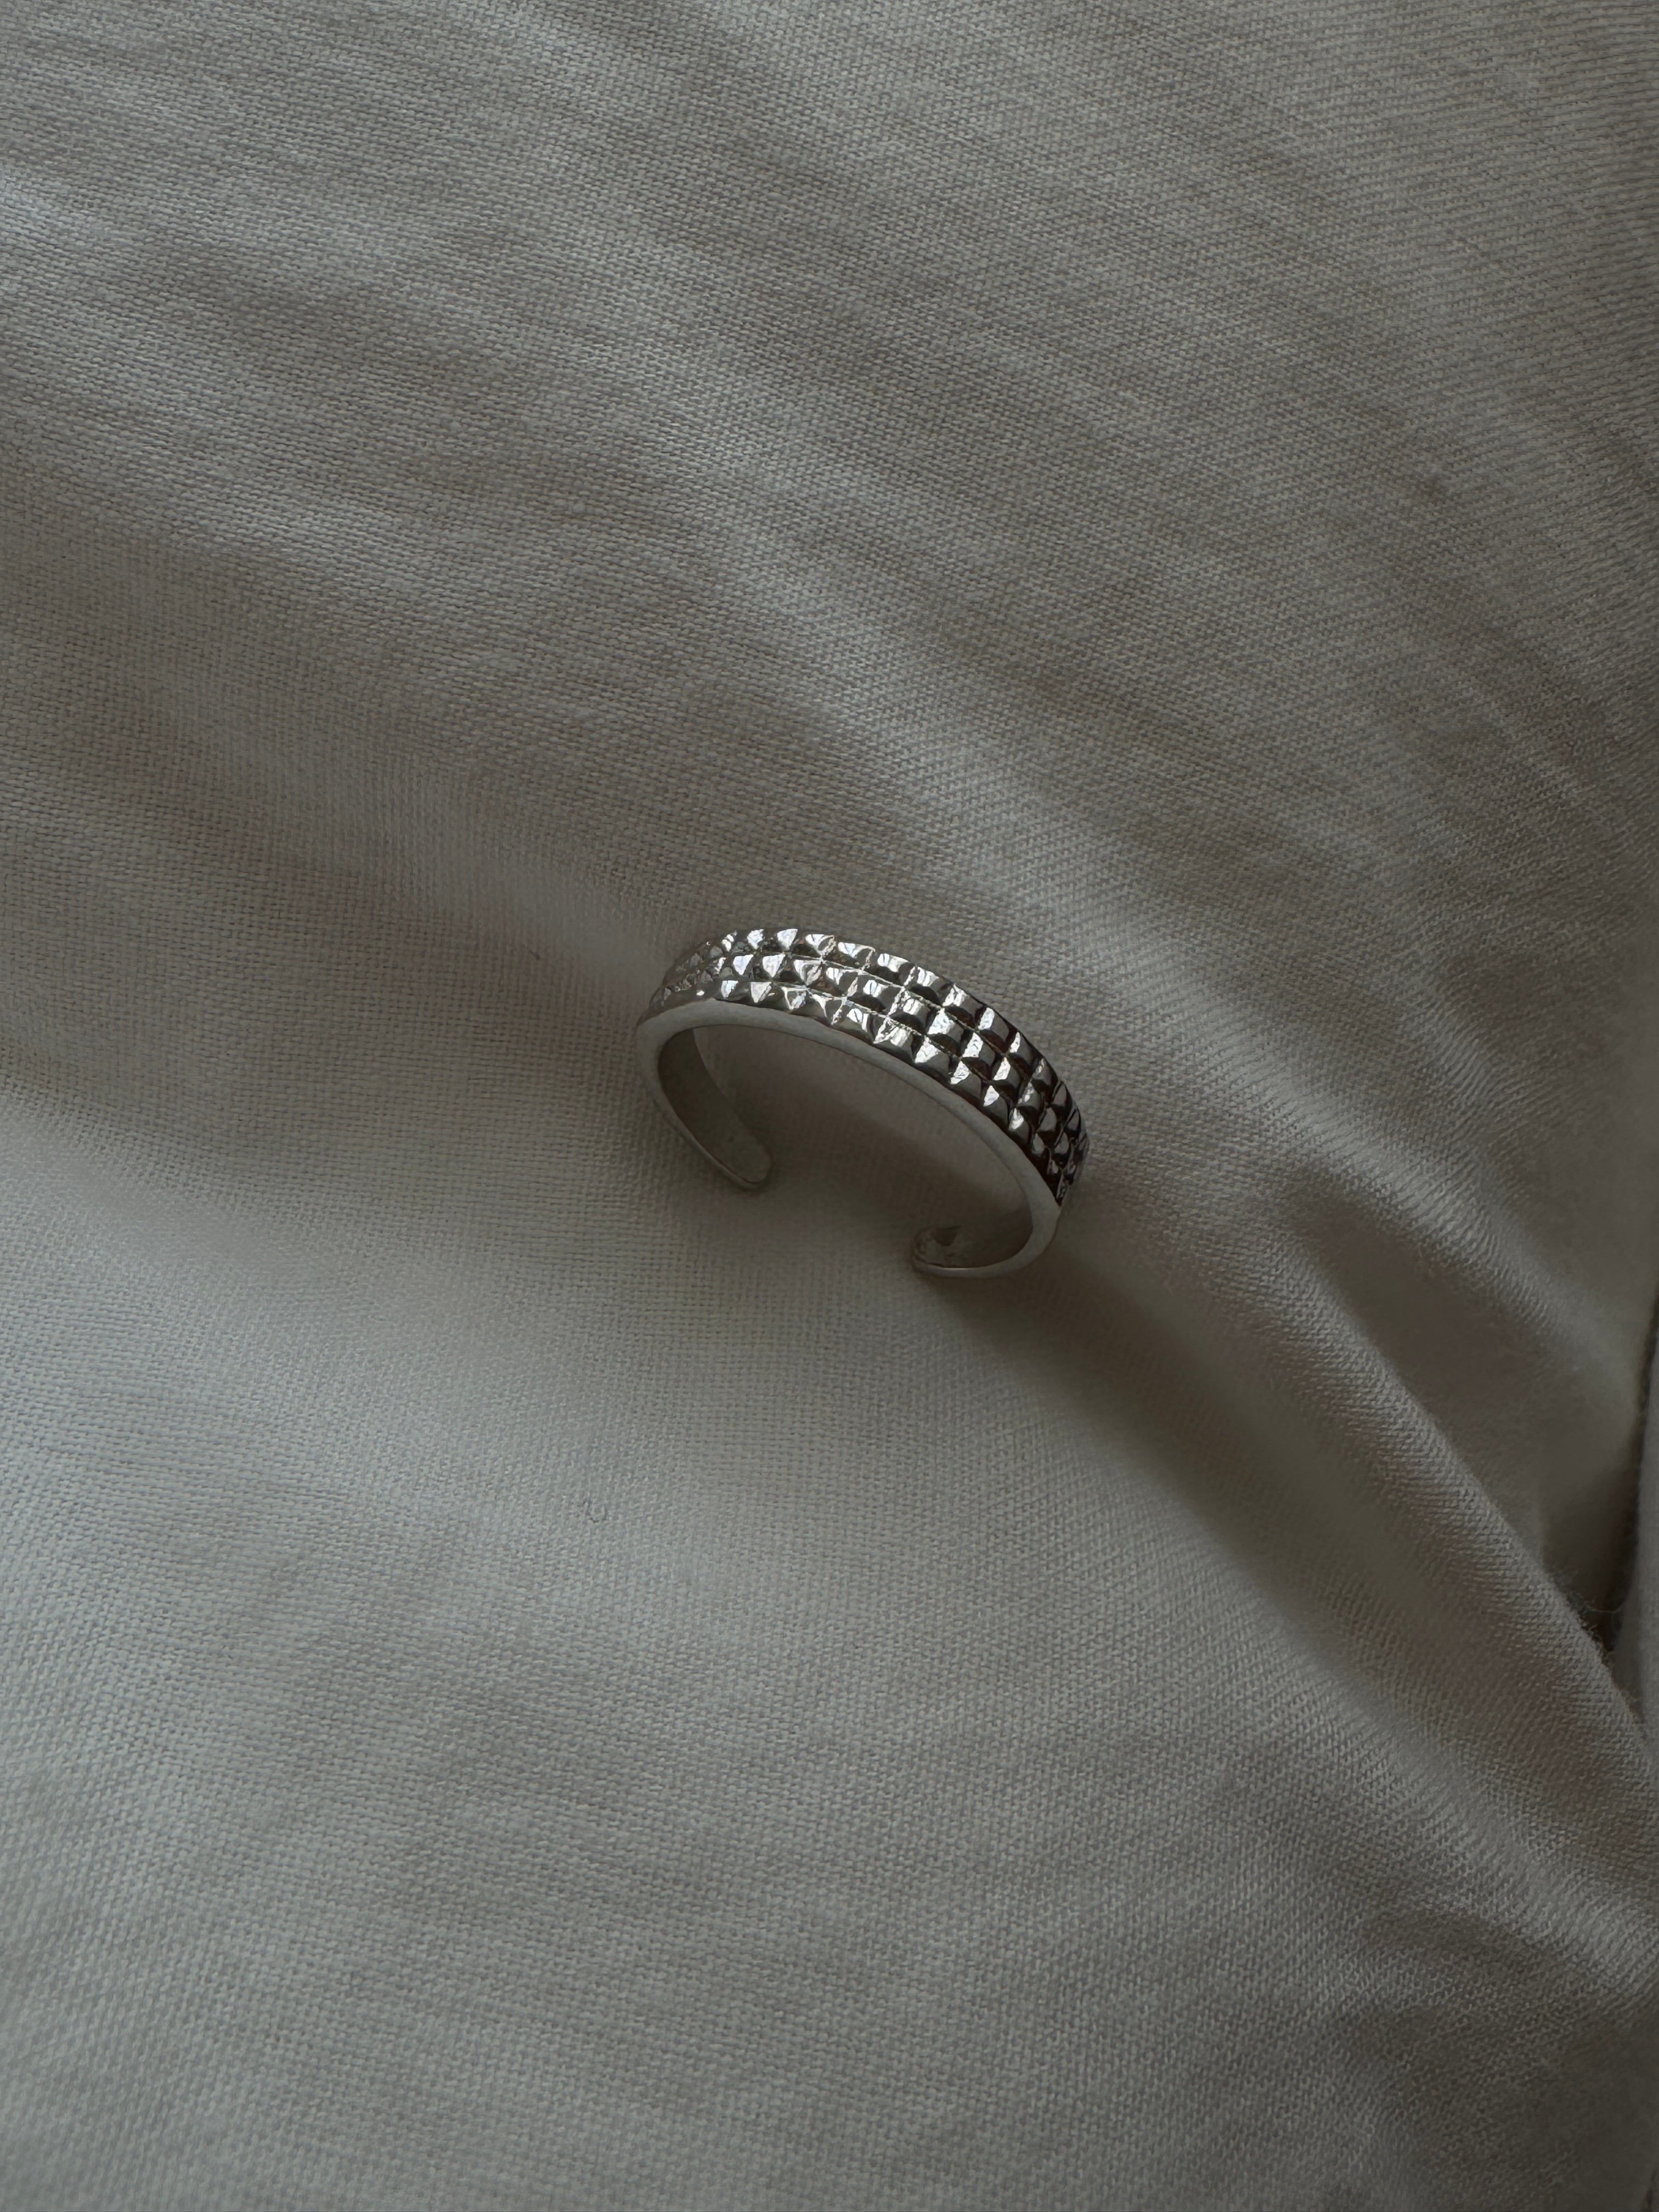 Shaped Ring